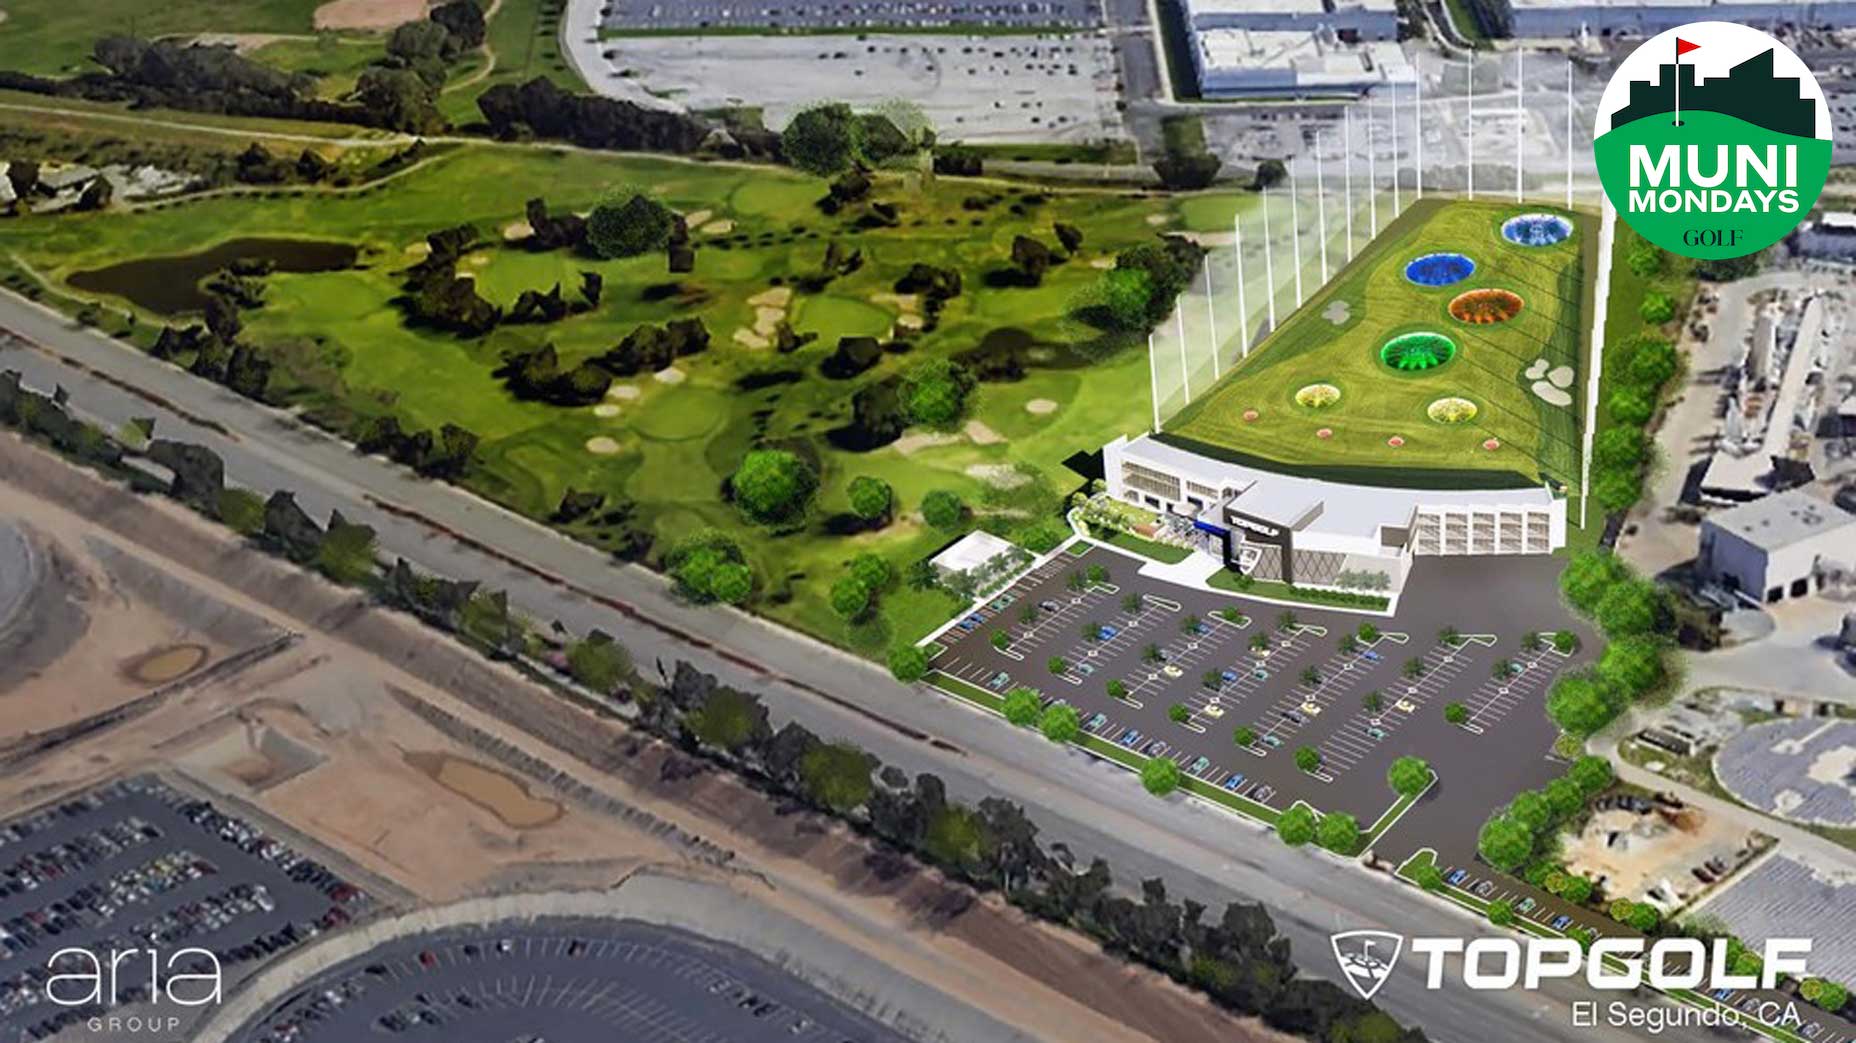 Topgolf is taking over a golf course — here's why that could work so well